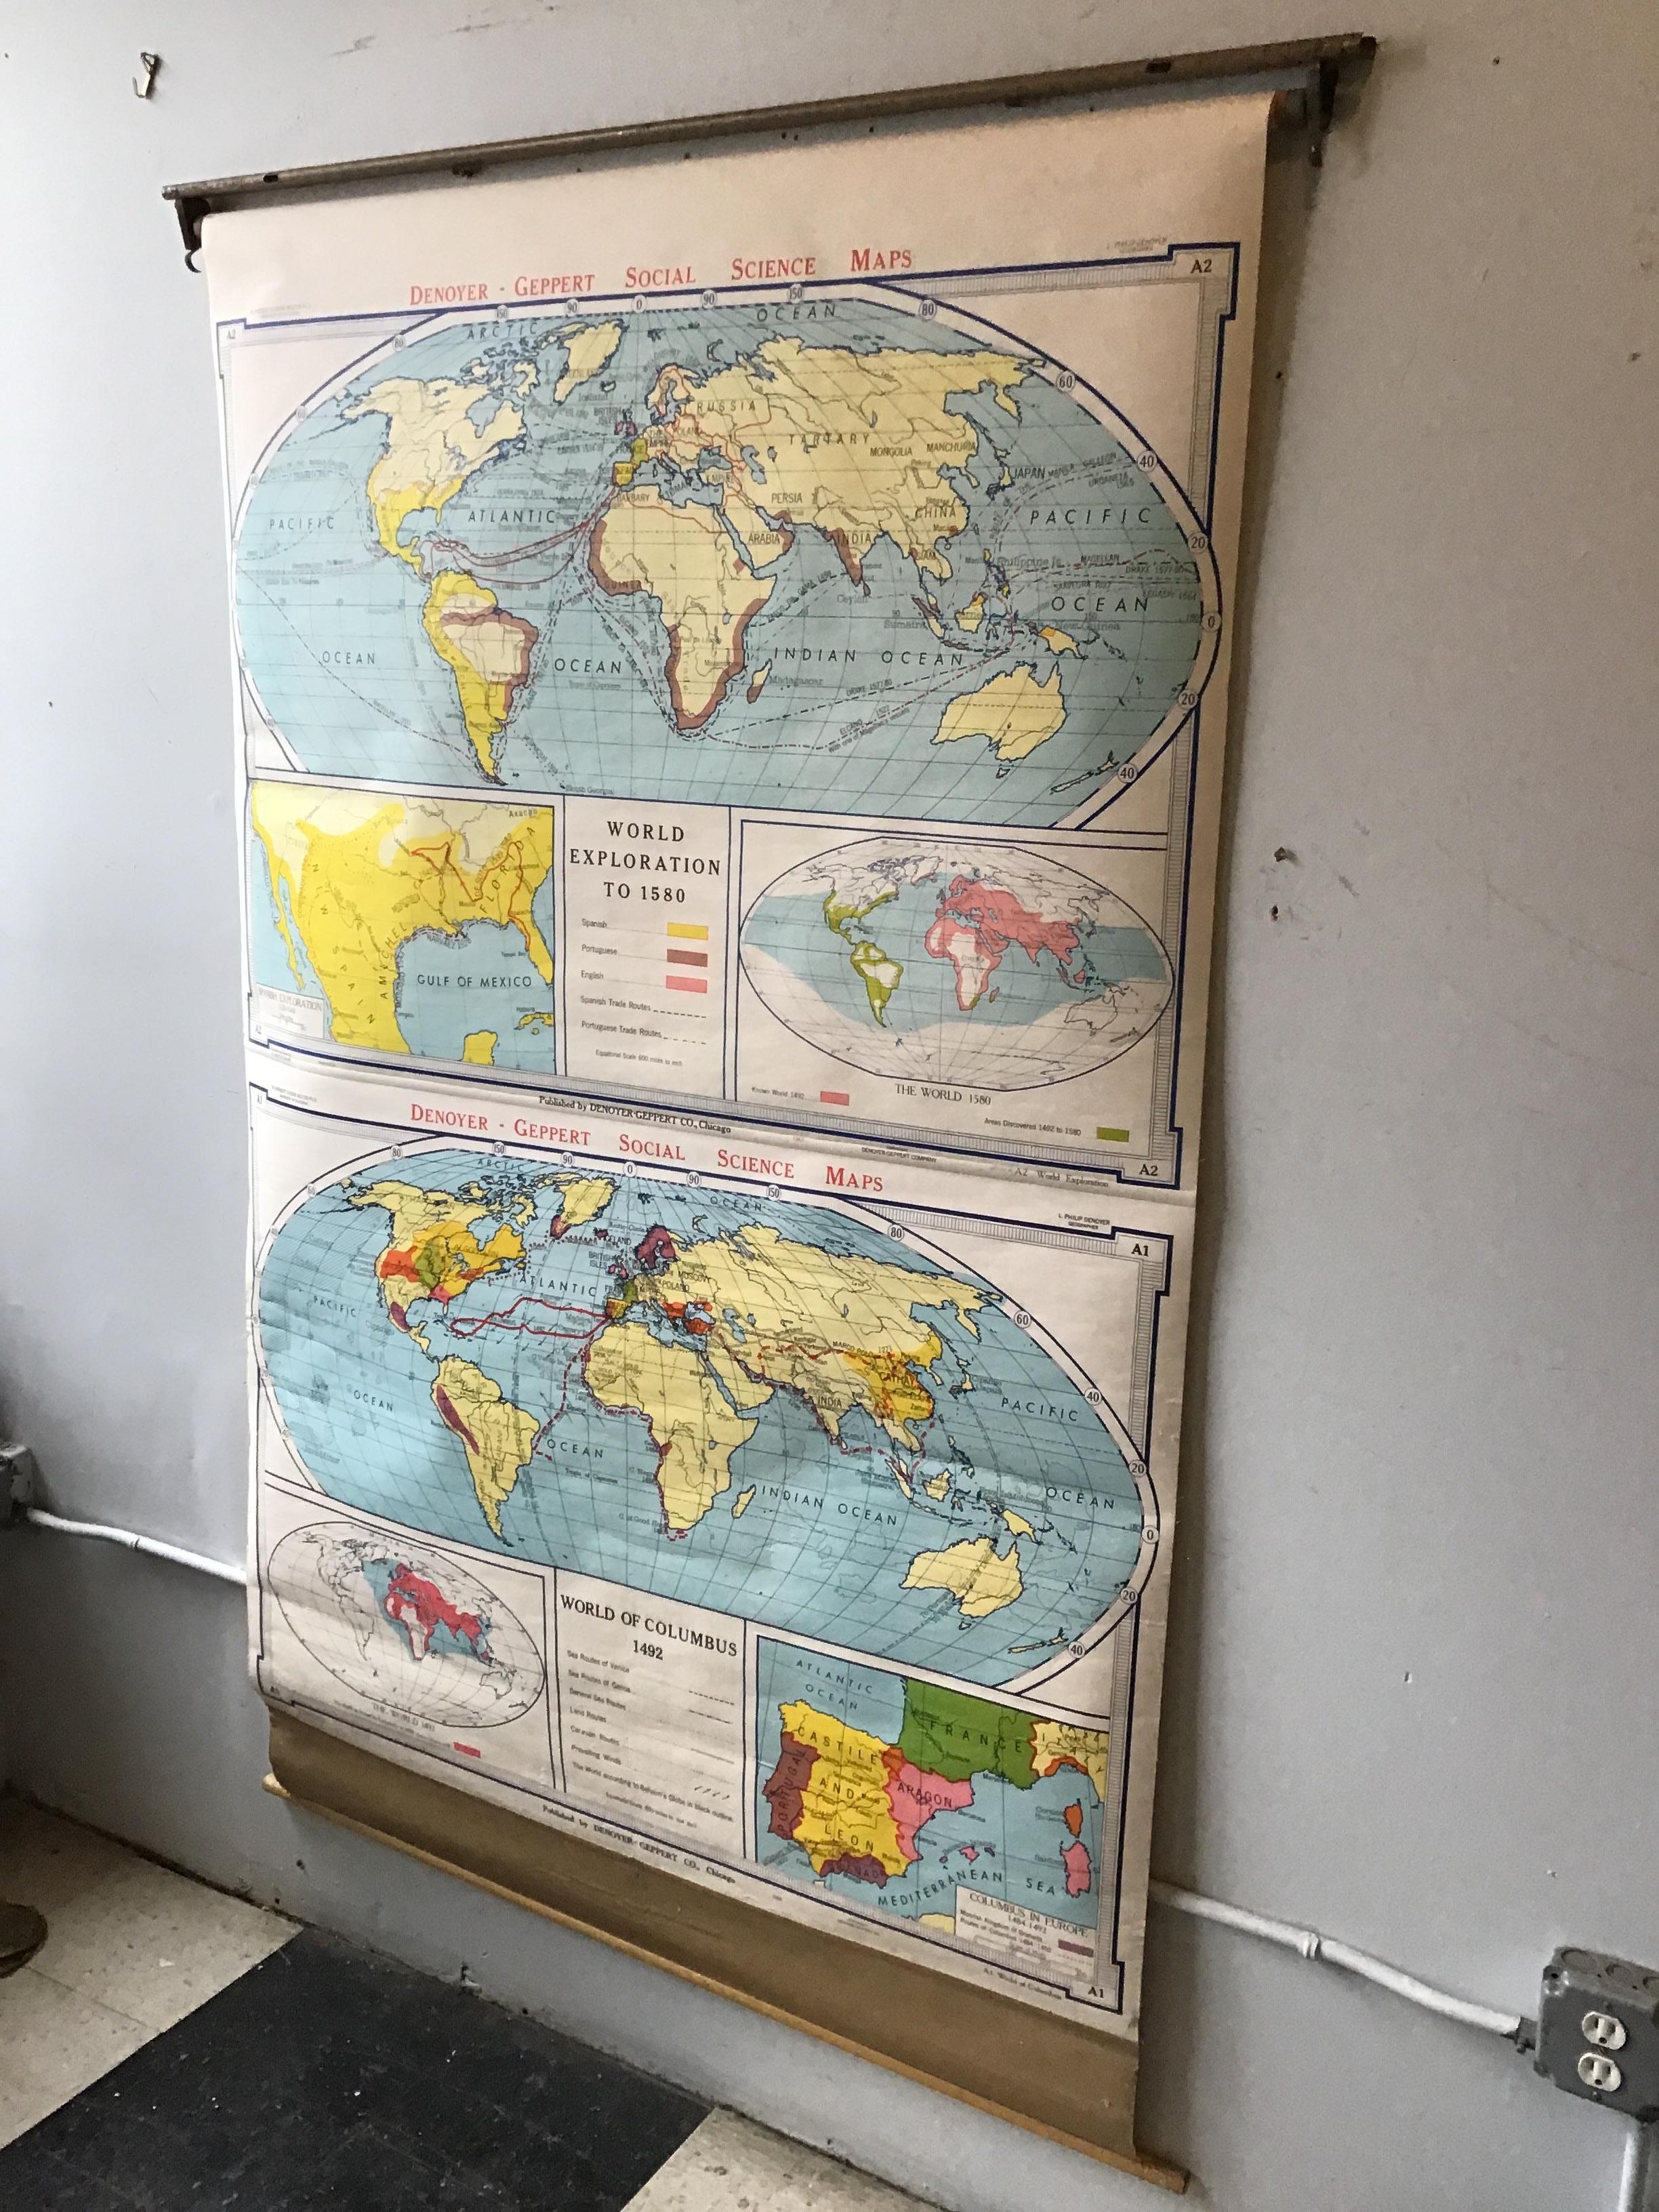 Pull down world exploration map from 1967.